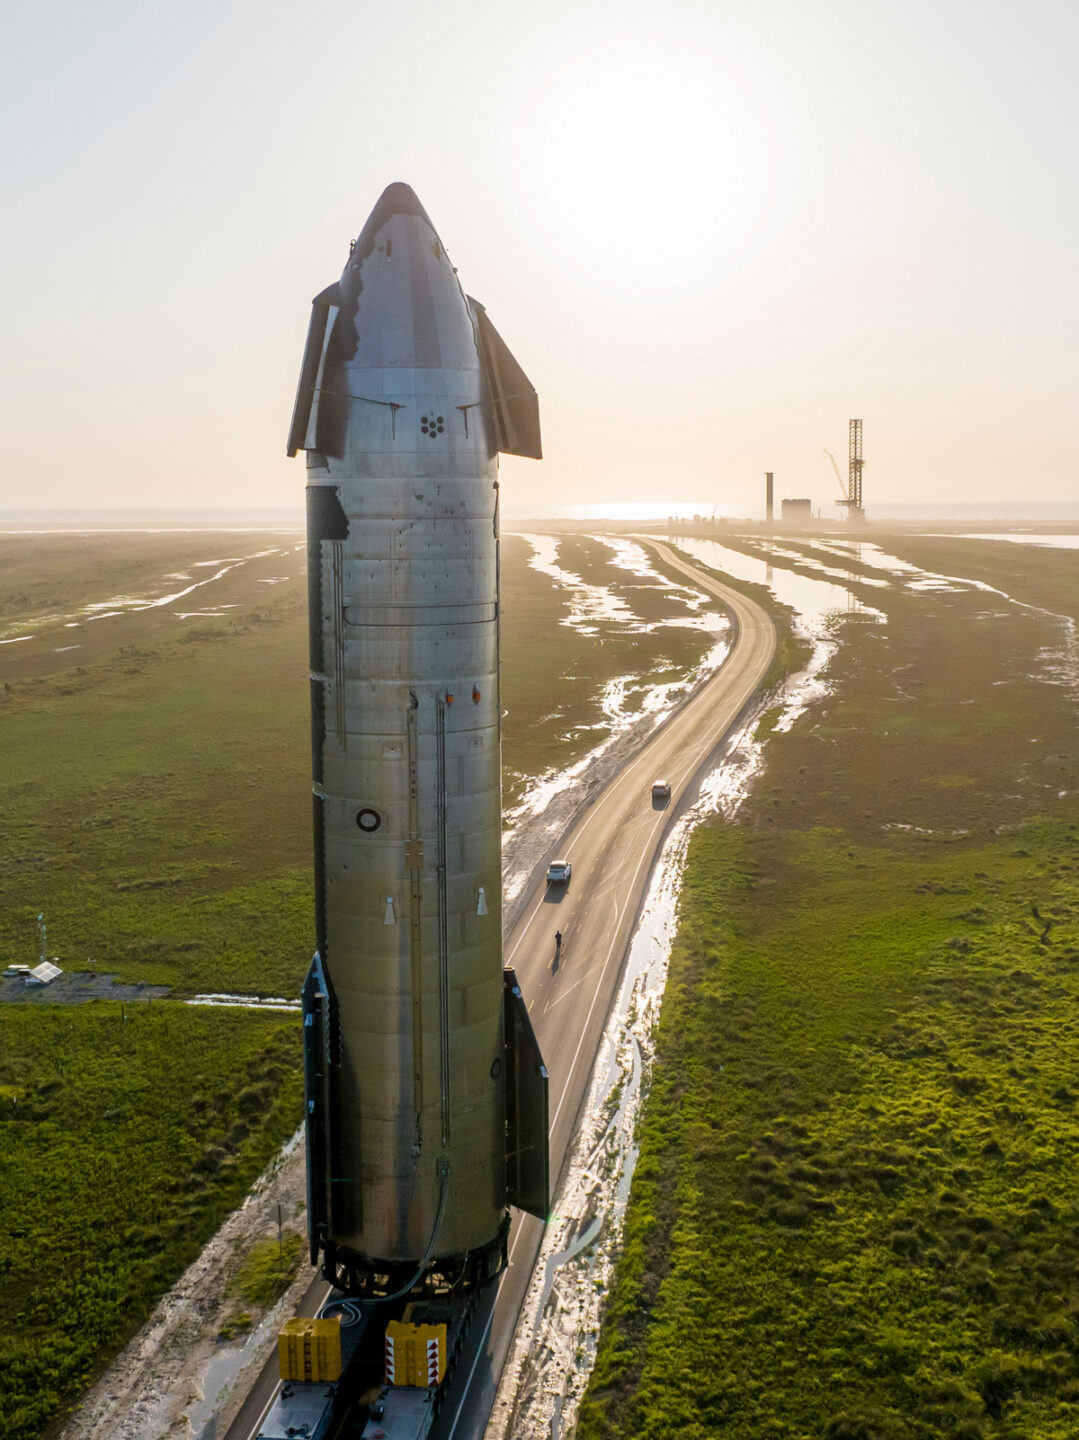 SpaceX rolls Starship 24 to the launch site of the Boca Chica spaceport